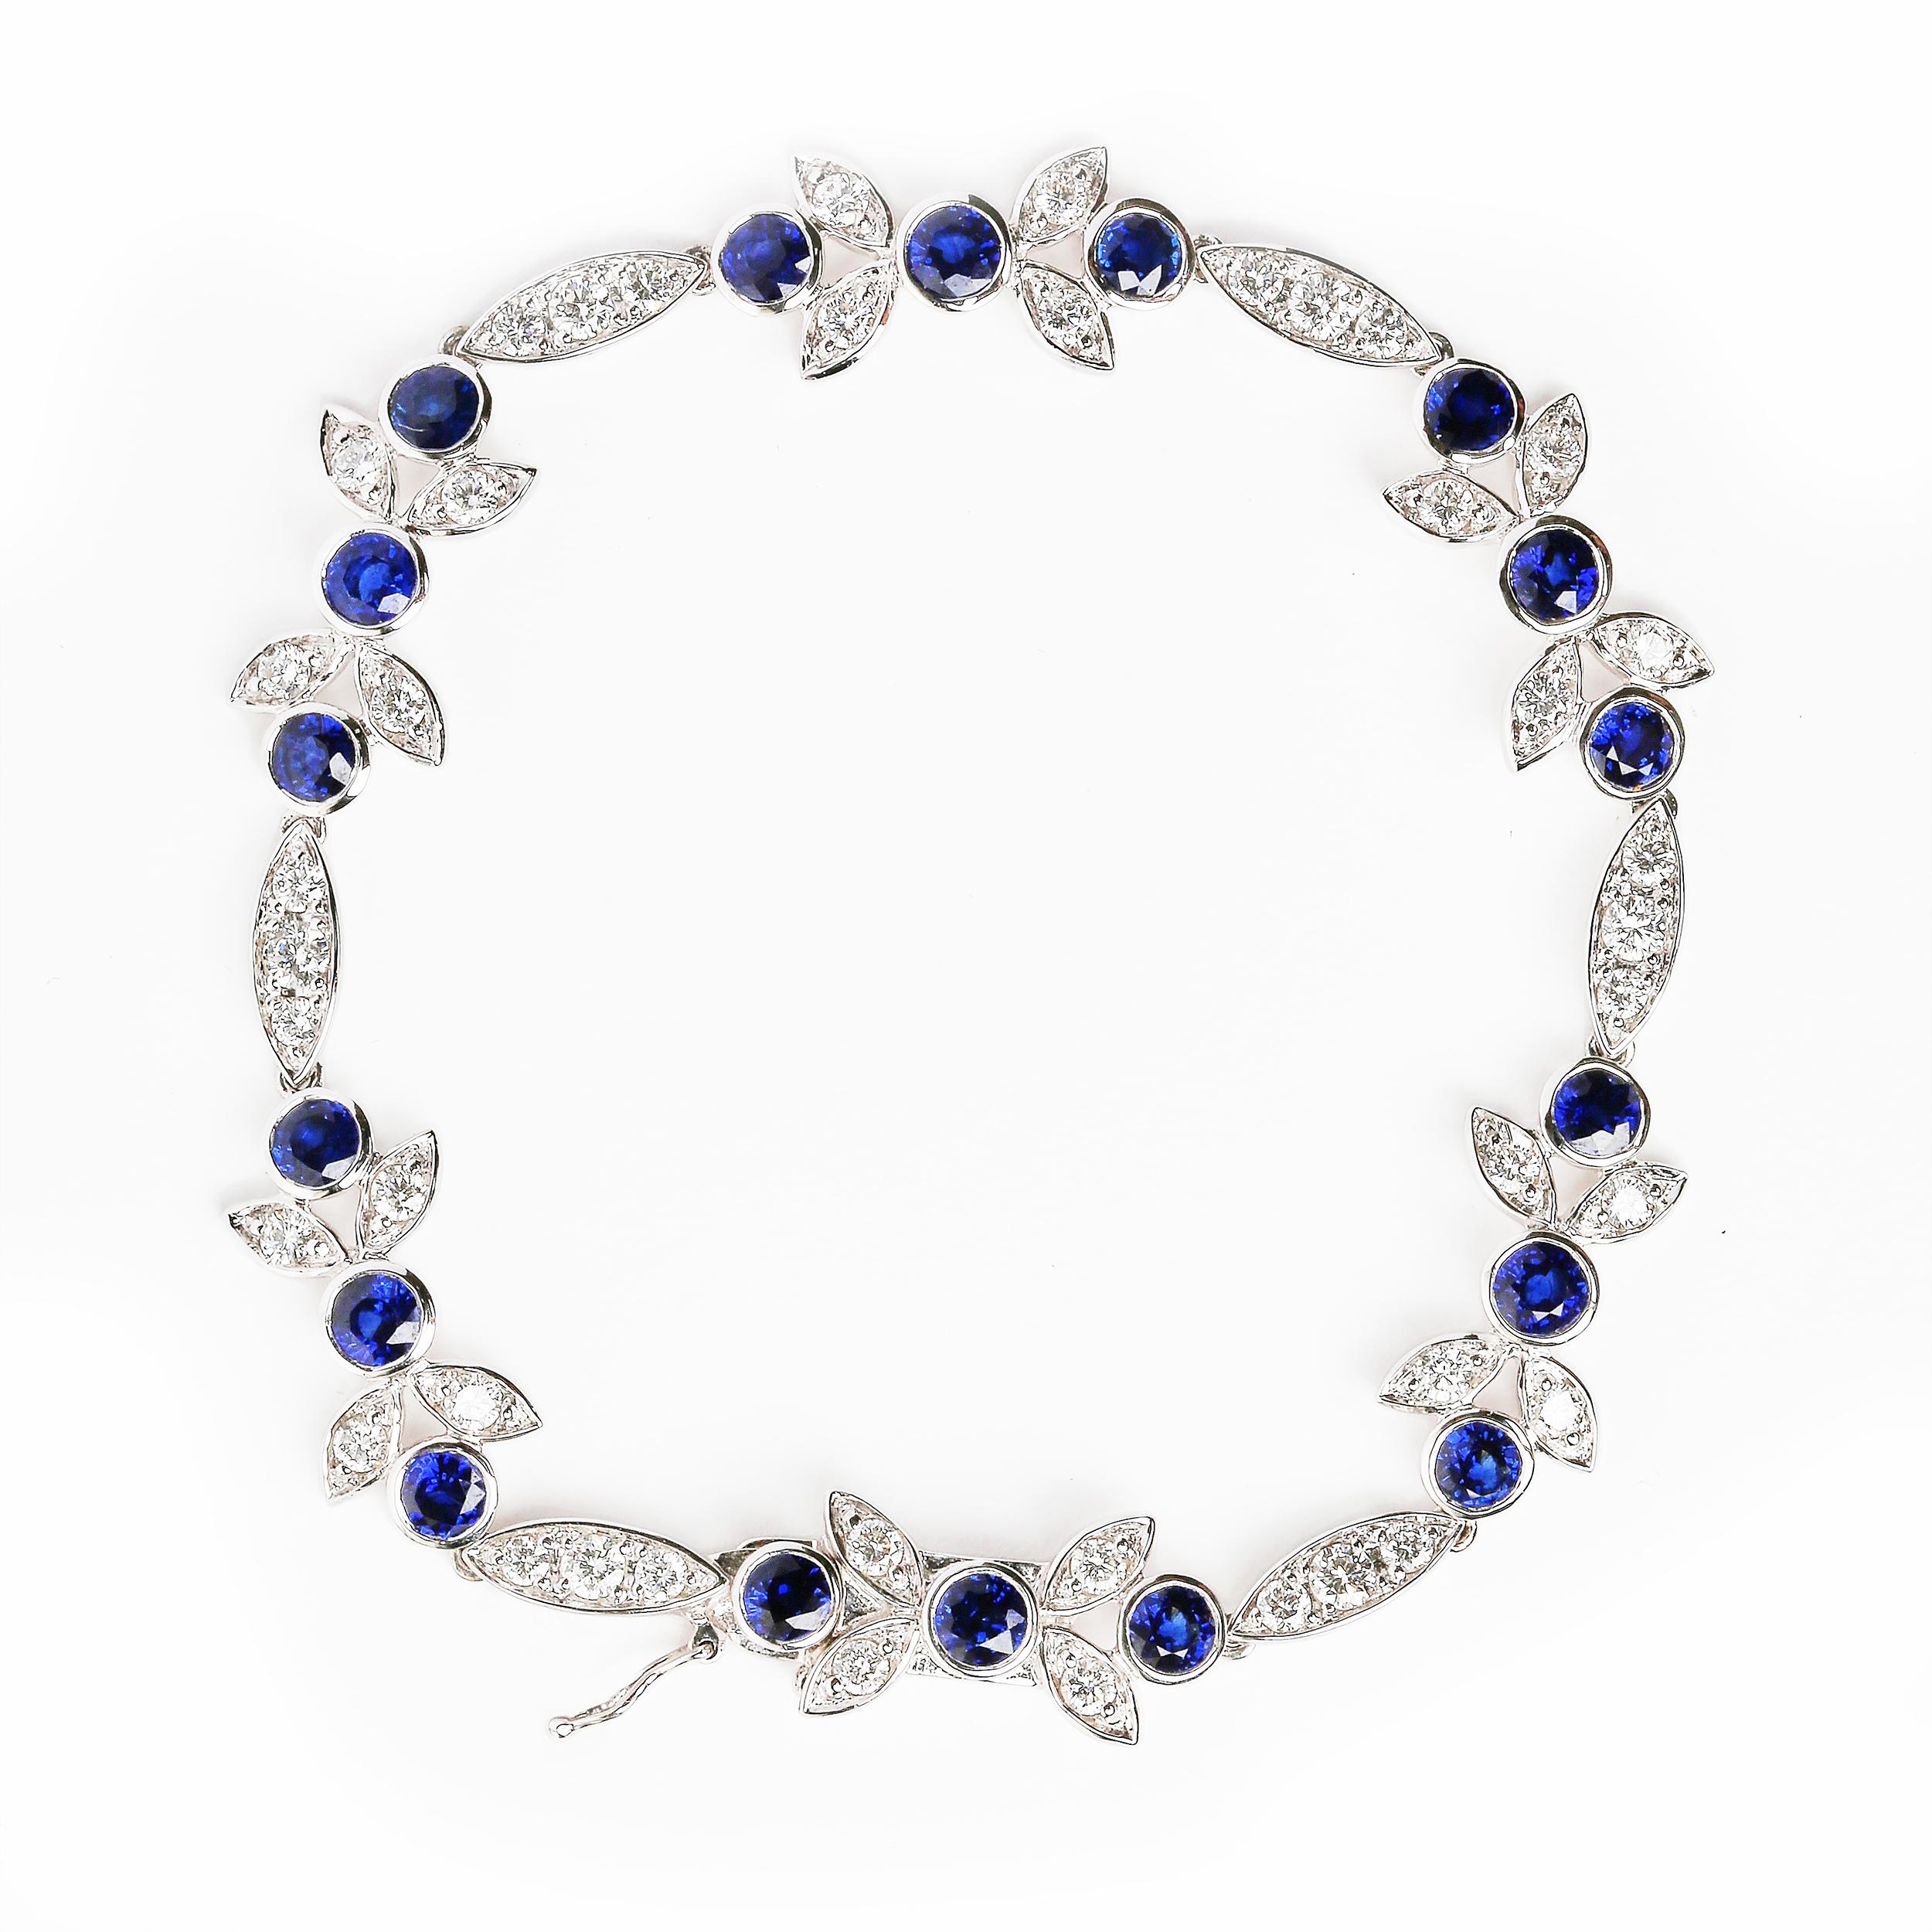 Made from a beautiful arrangement of horizontal marquise and floral shaped links, this 18k white gold bracelet graces the wrist in timeless elegance. This link bracelet features 3x3mm round heat-treated blue sapphire gemstones secured within bezel